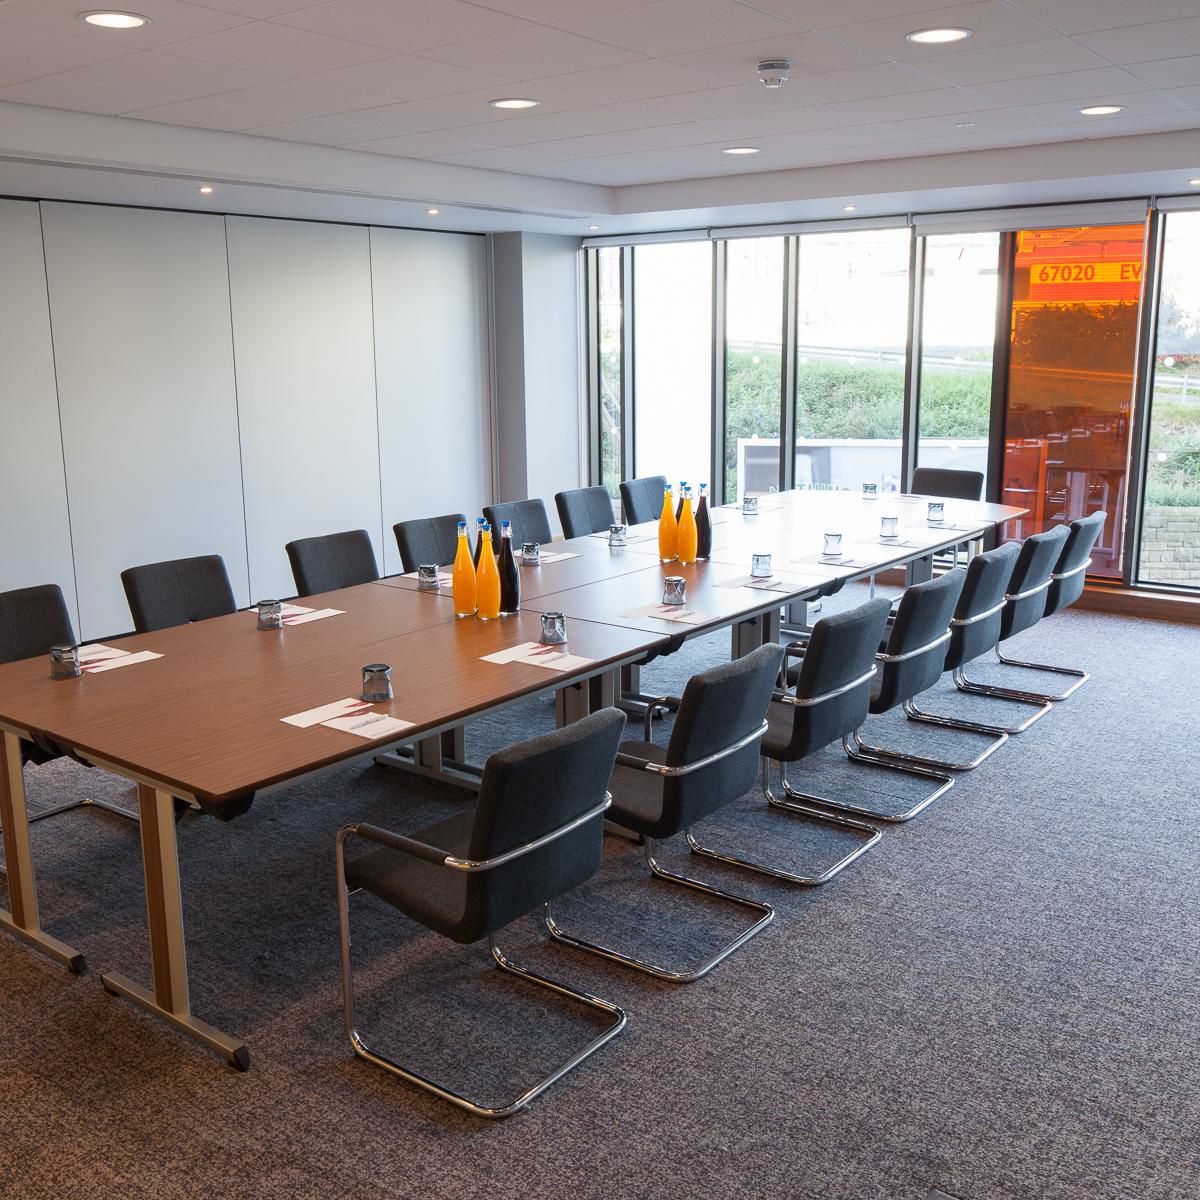 Our meeting rooms can be split to alter the size of the room